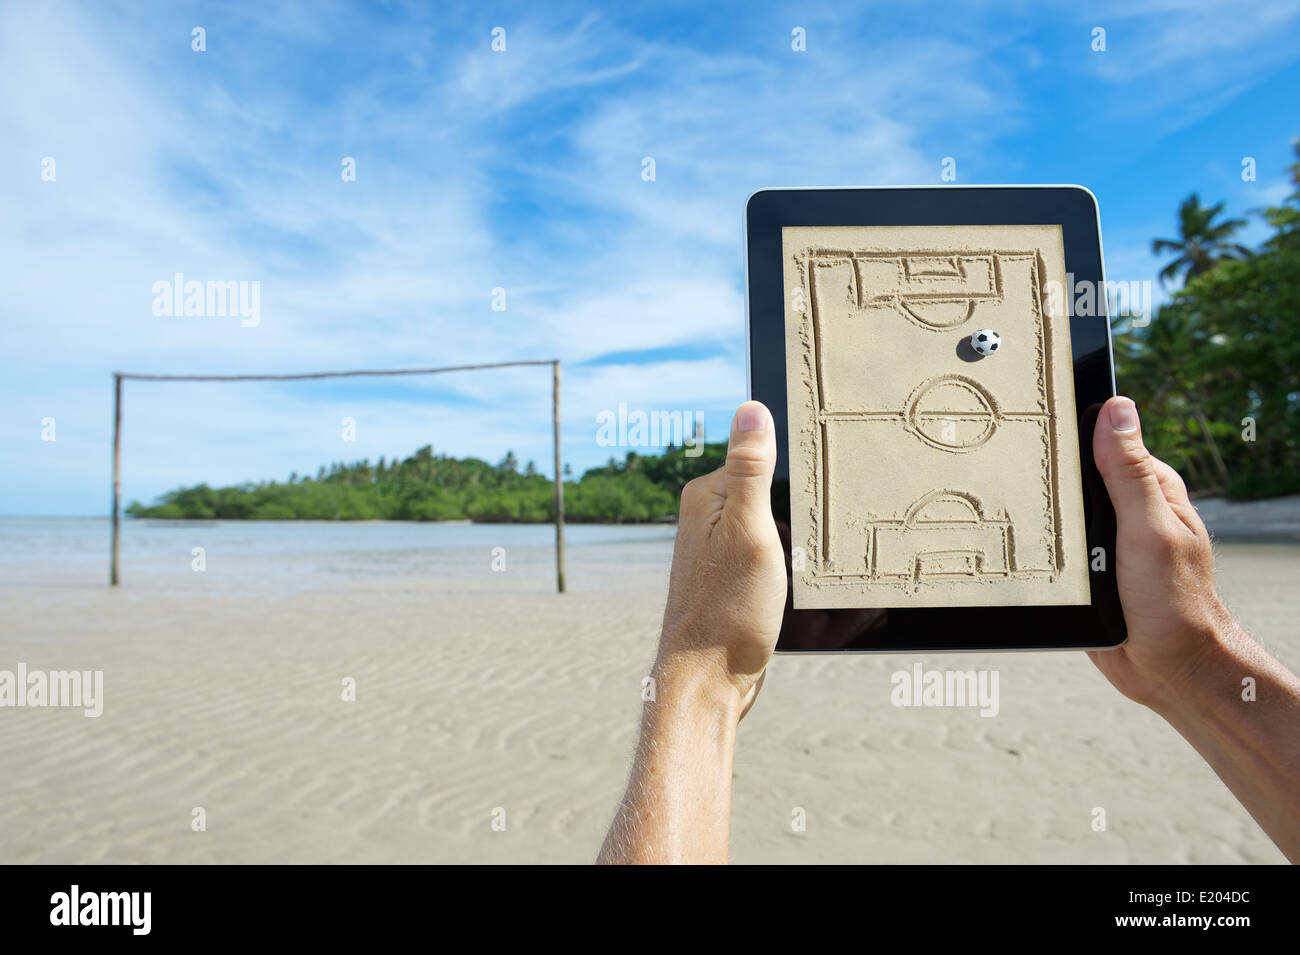 Hands holding tactics board at beach football pitch in Nordeste Bahia Brazil Stock Photo